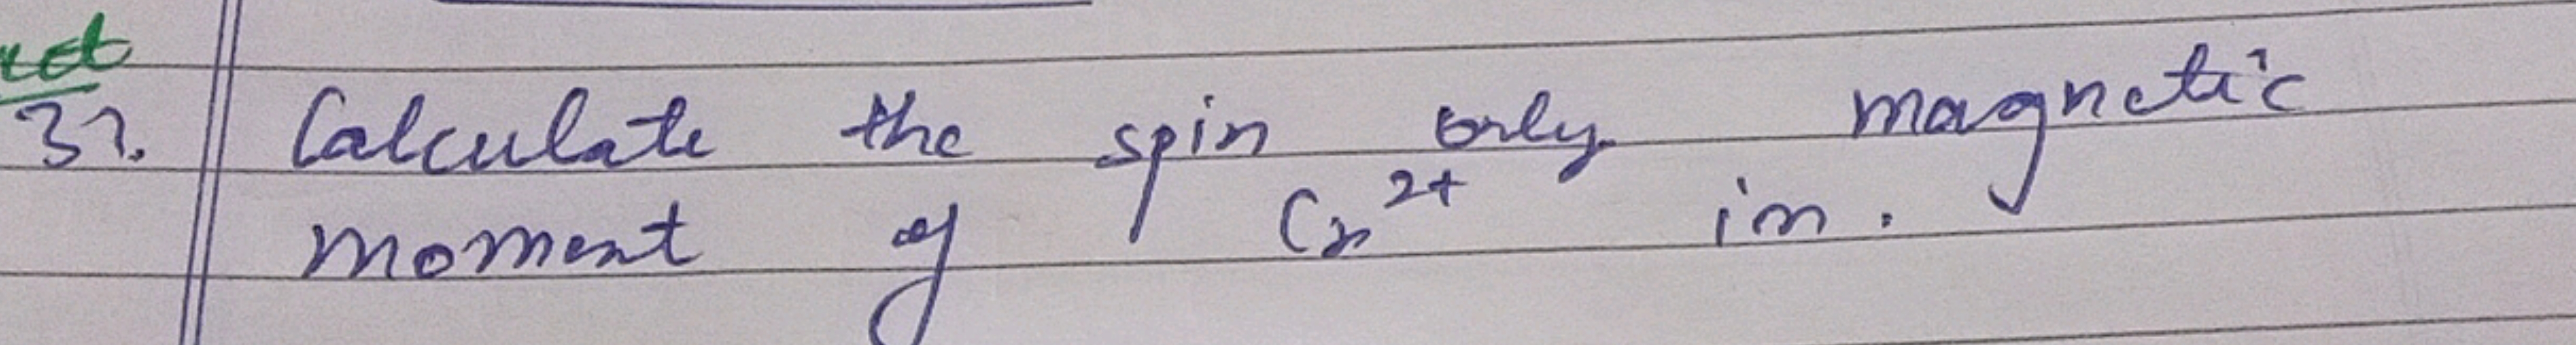 37. Calculate the spin orly magnetic moment of if Cx2+ in.
